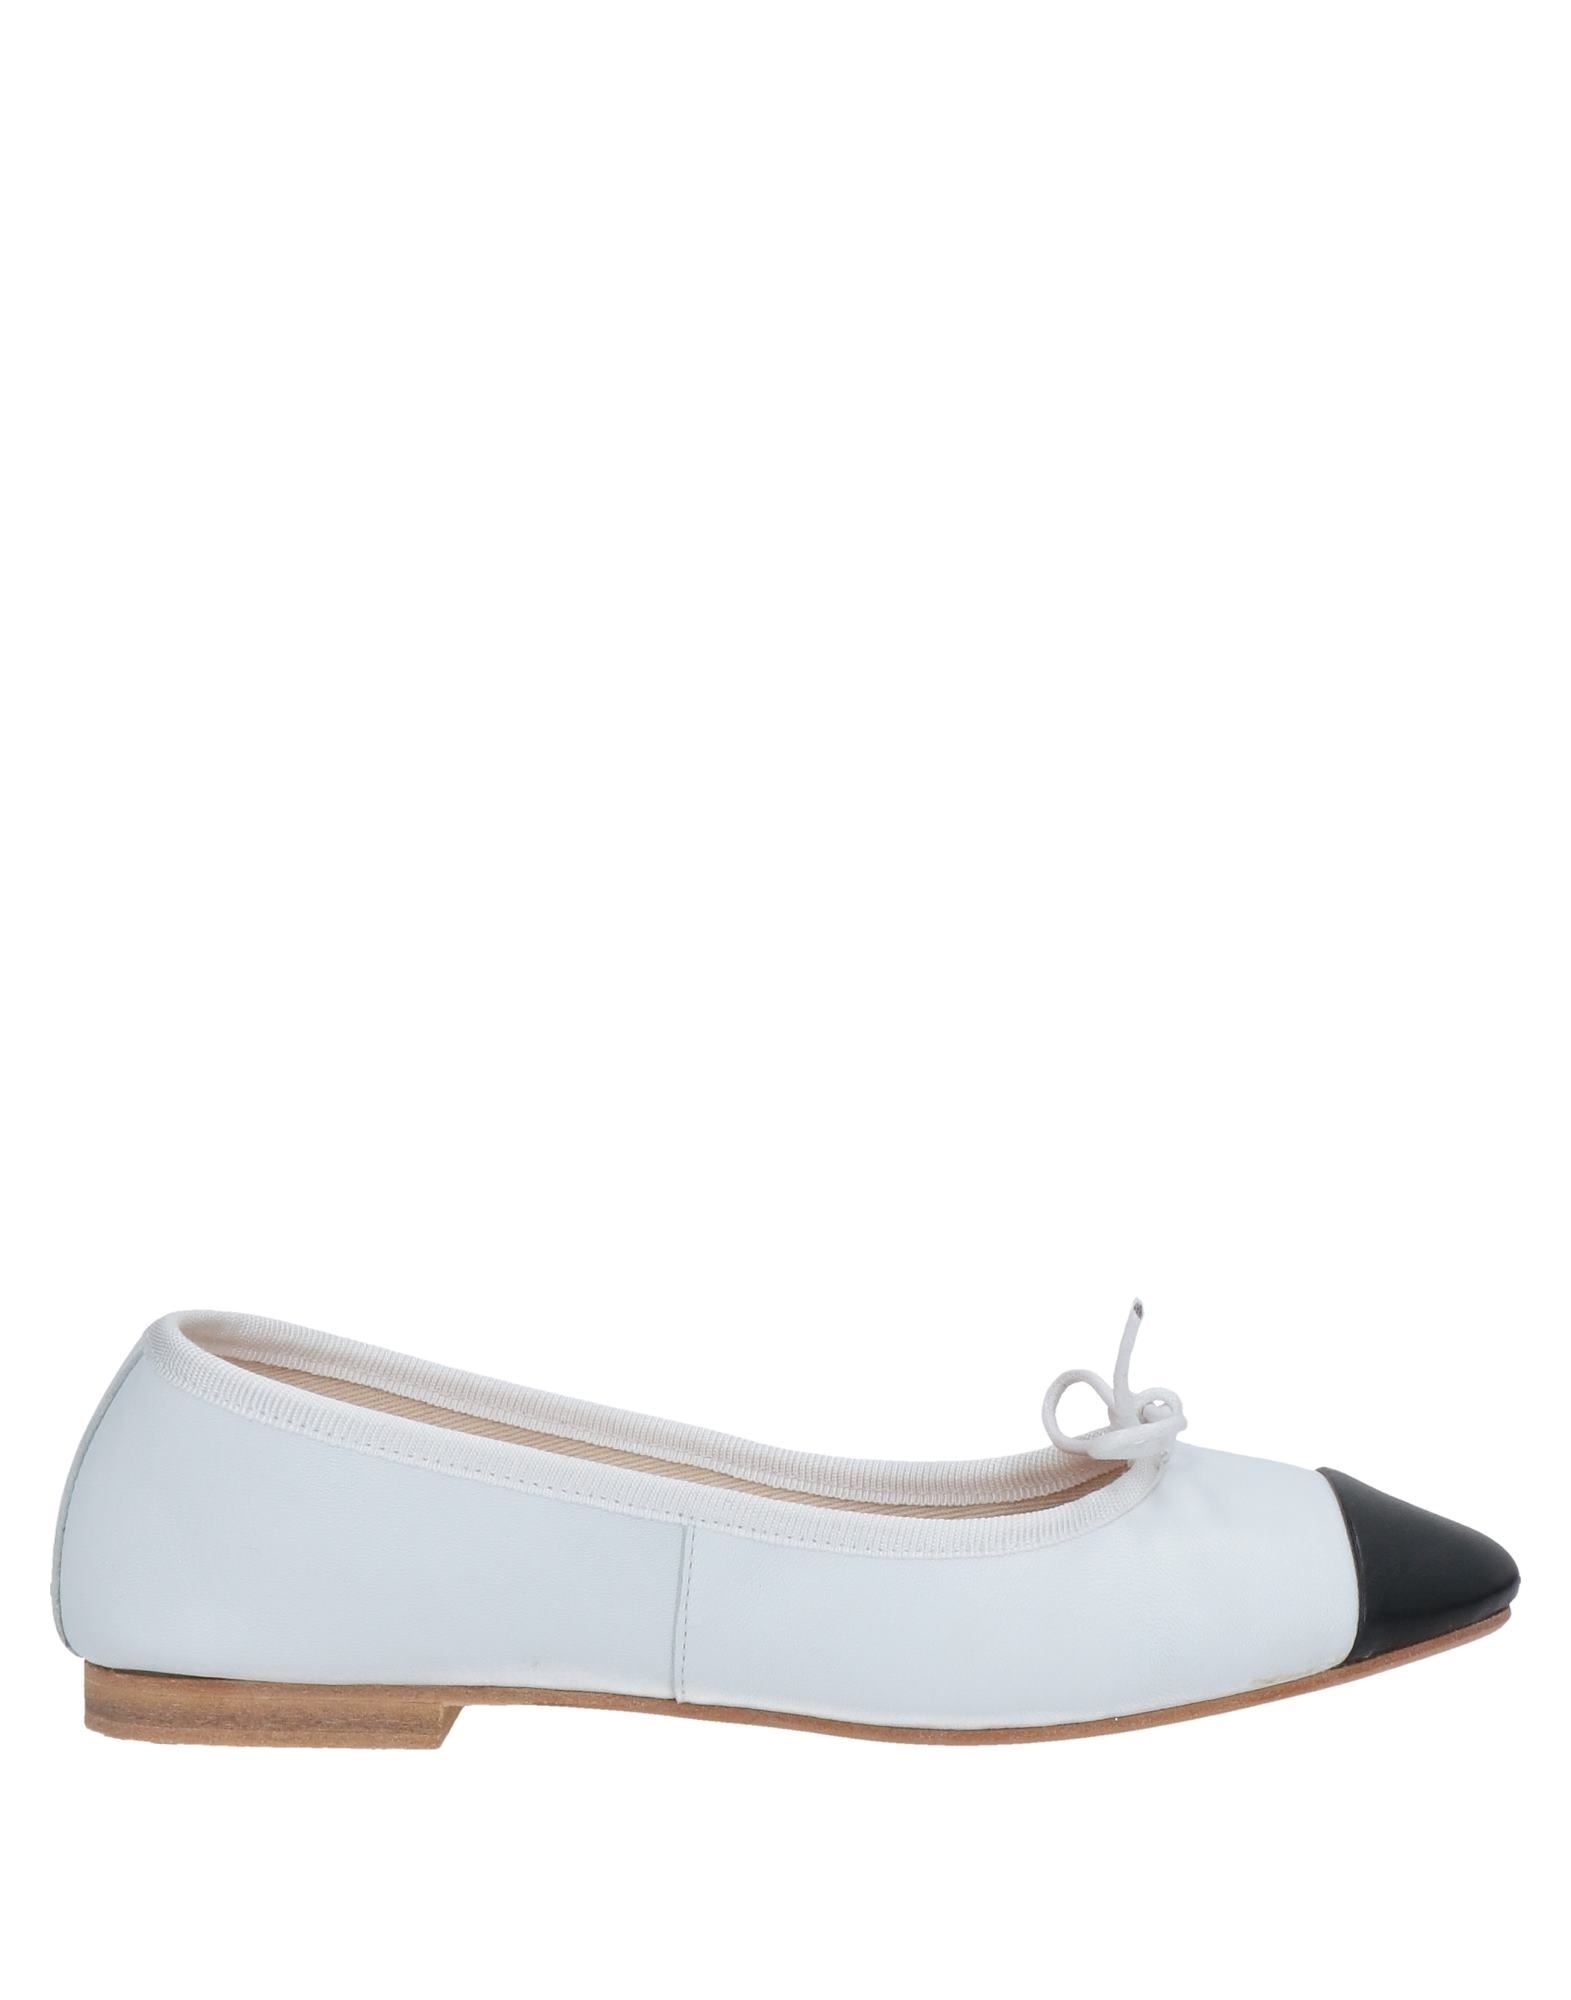 By A. Ballet Flats In White